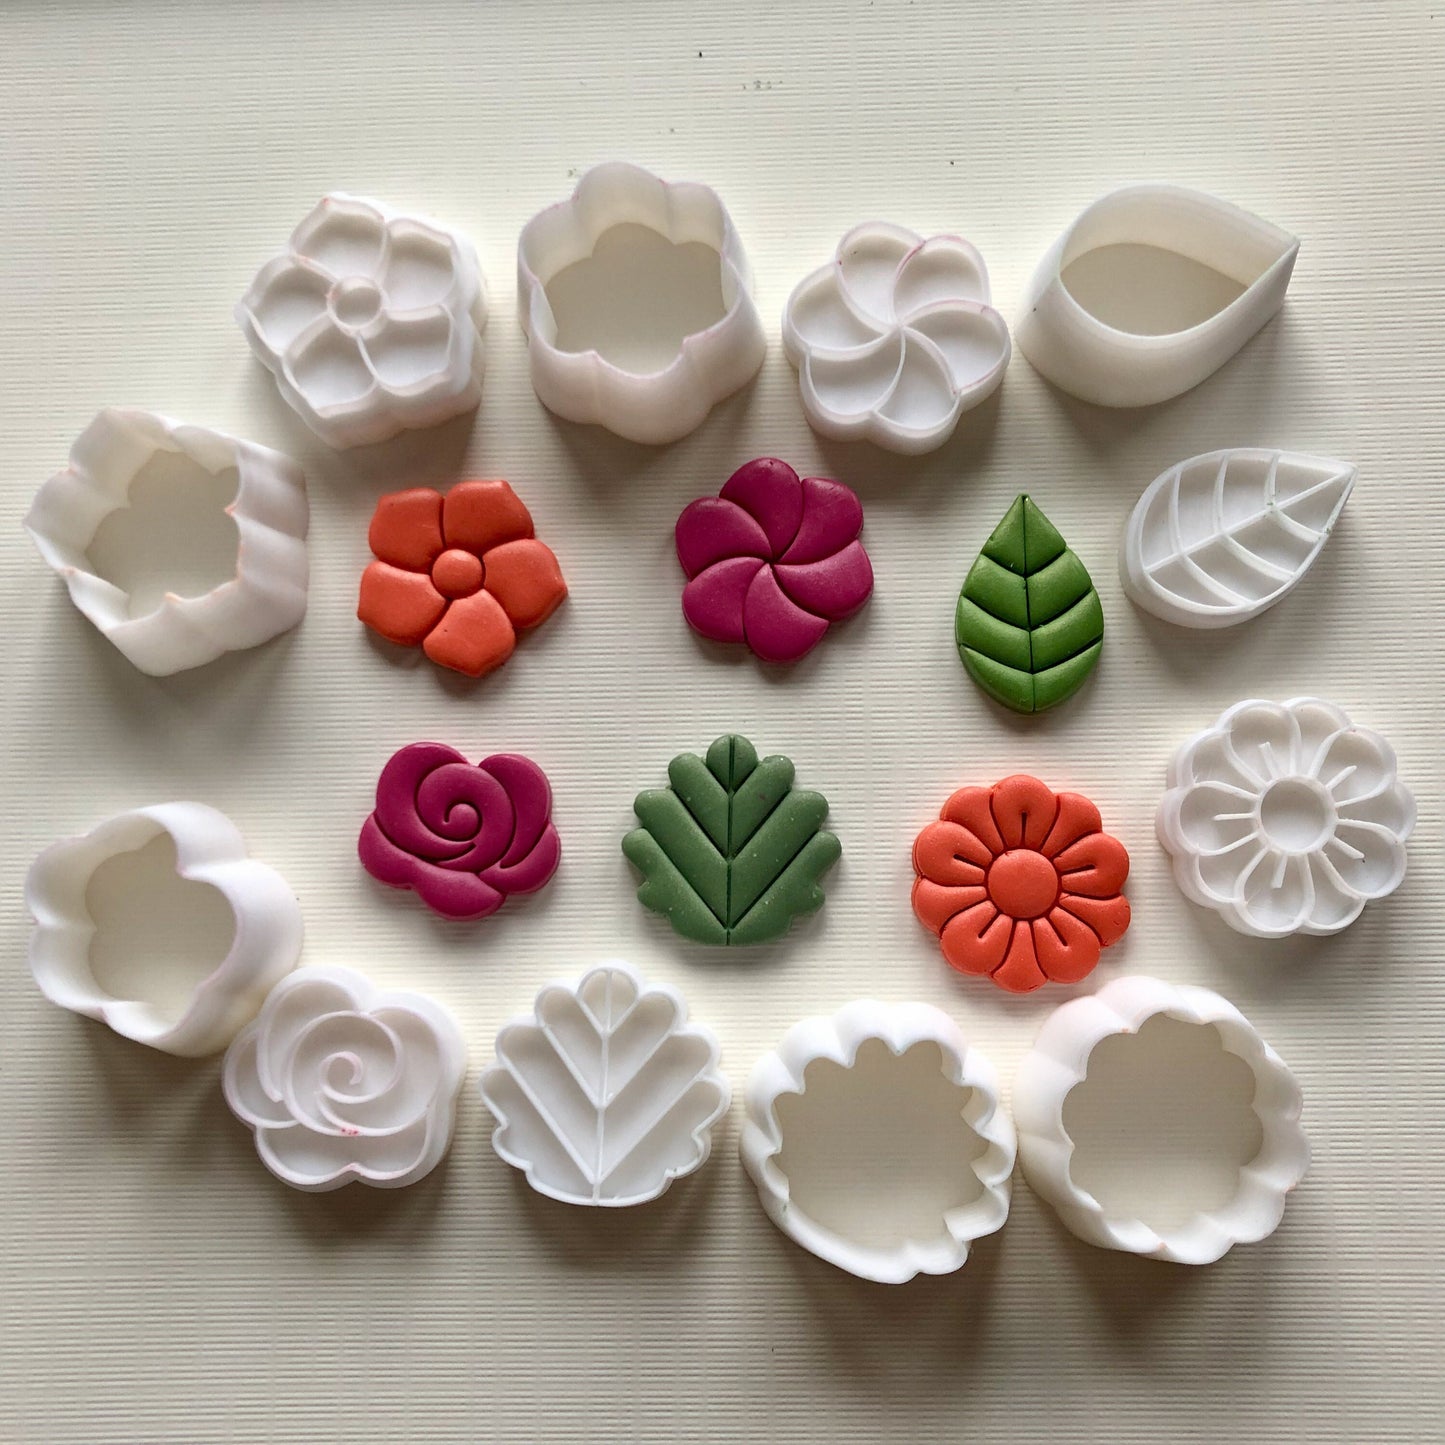 One inch flowers (Set 1) stamps and cutters - made for use with polymer clay